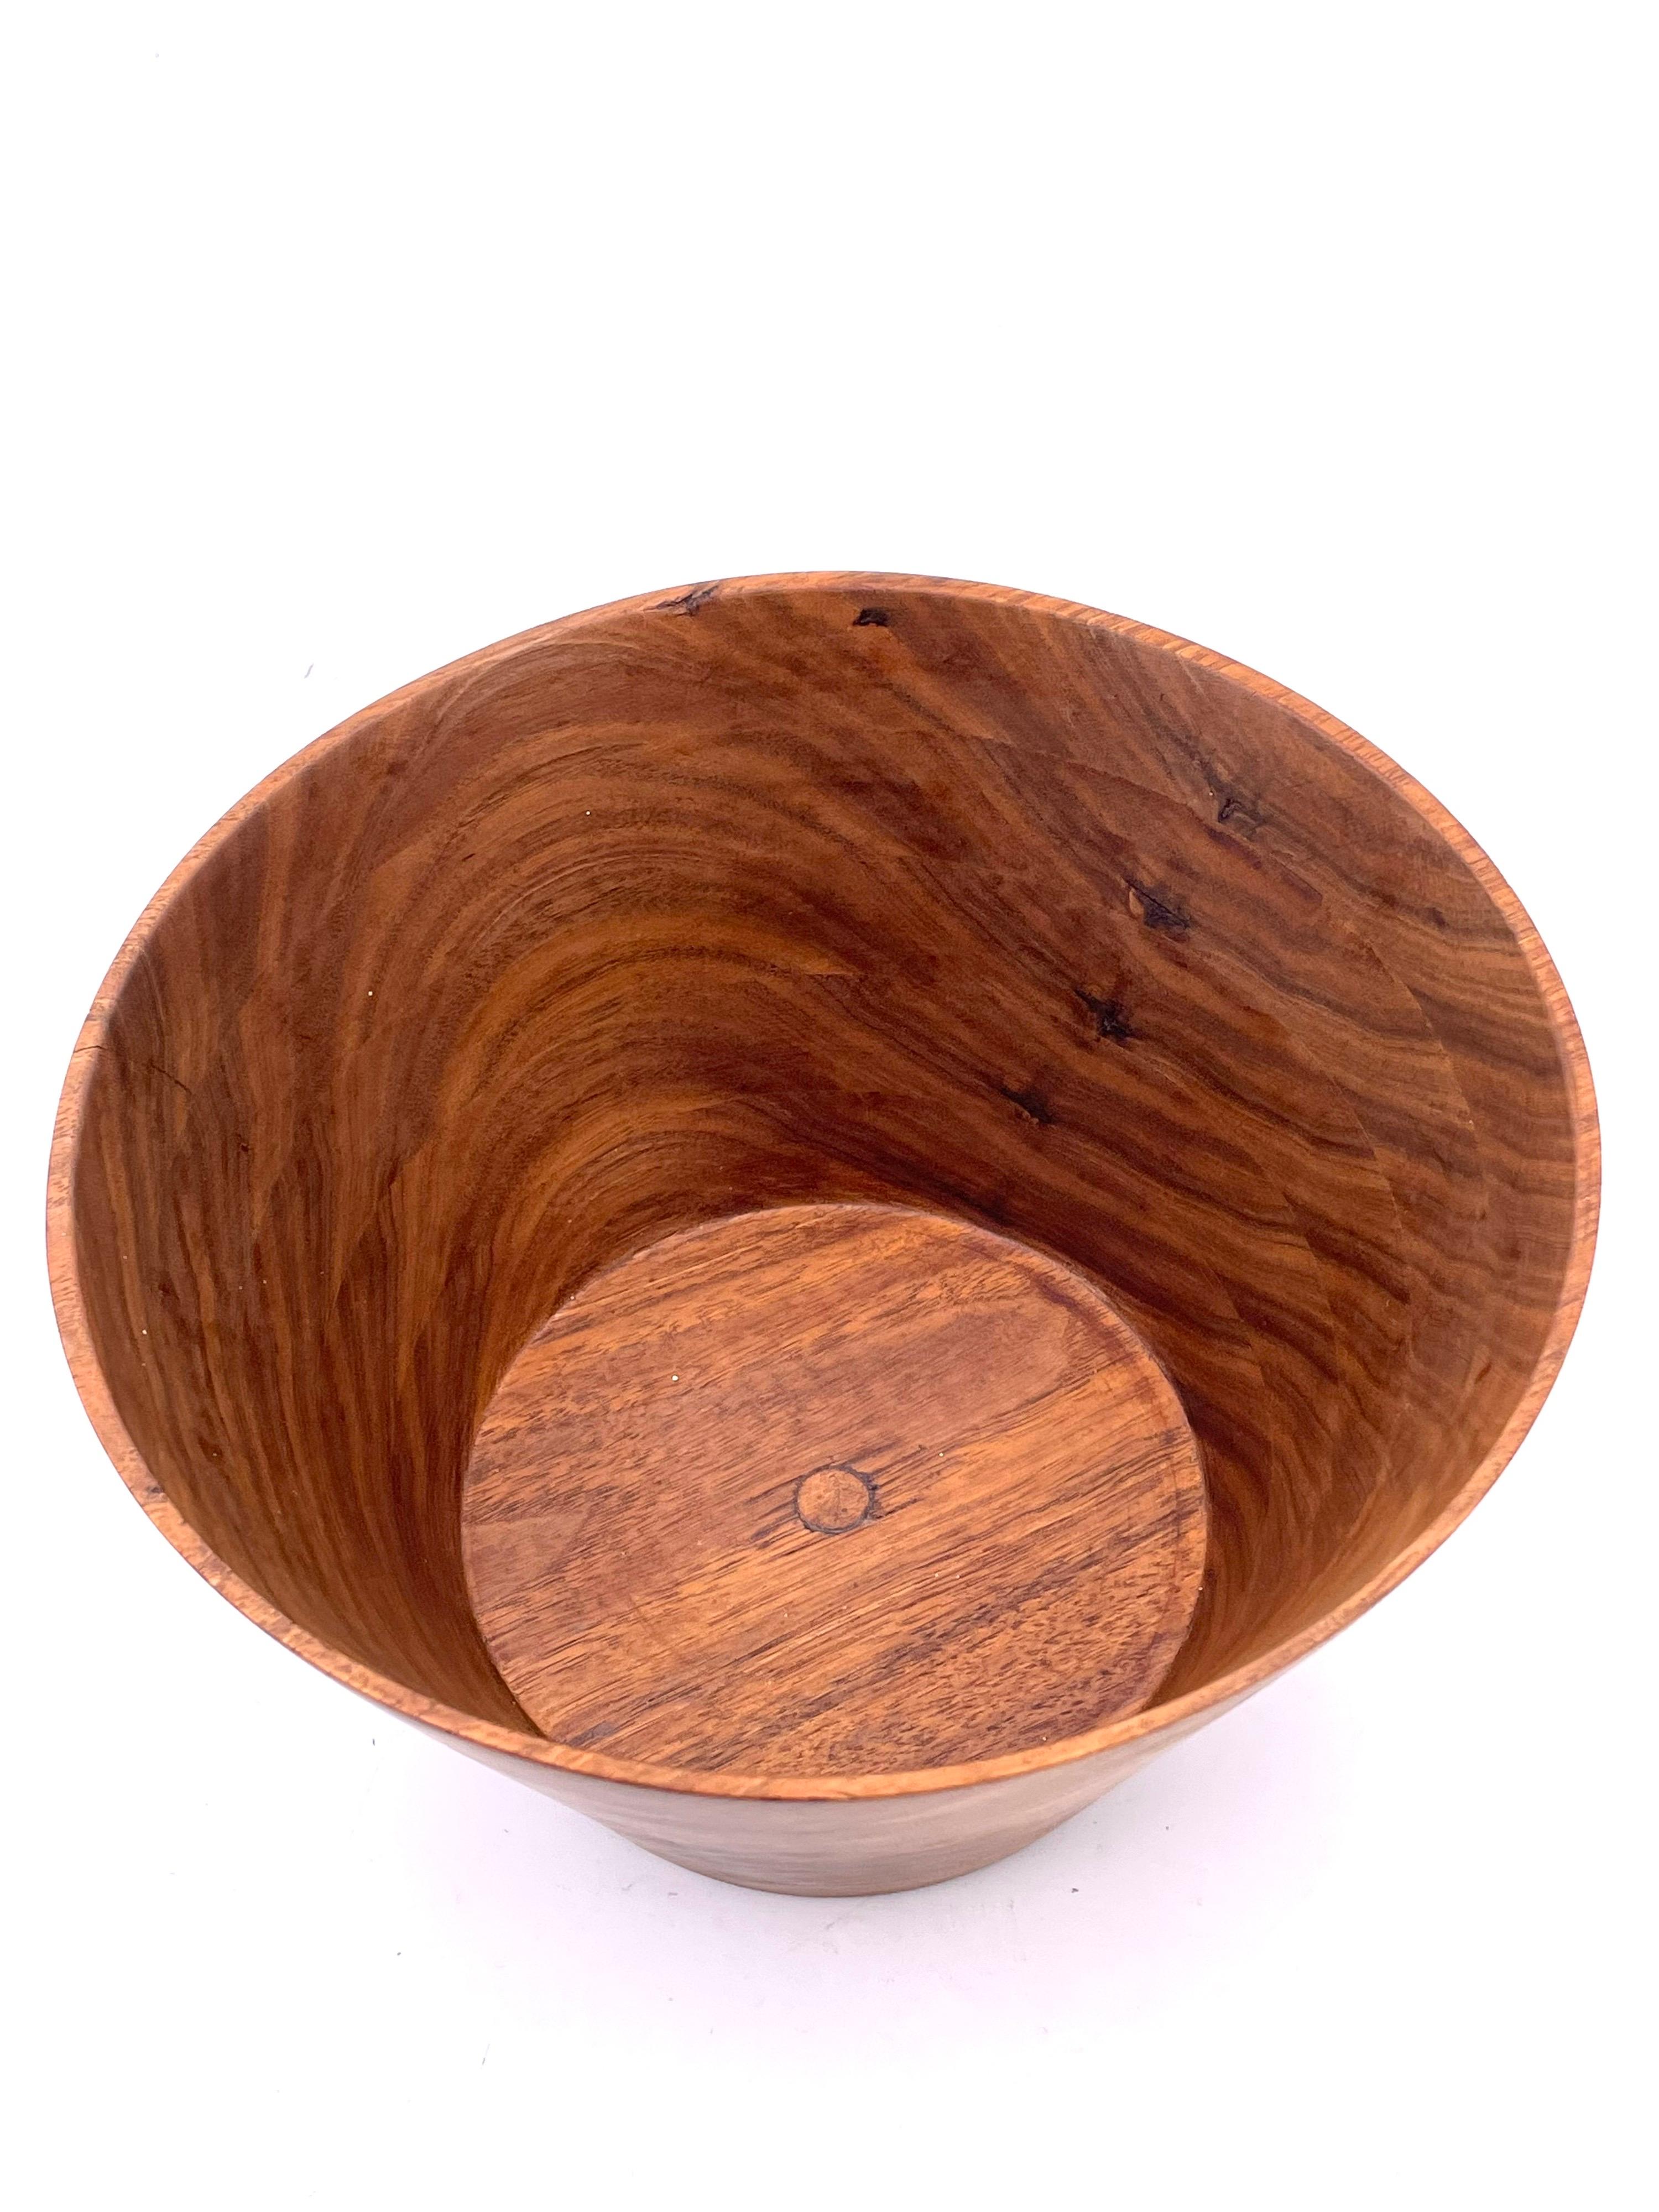 American Midcentury Hand-Turned Walnut Bowl In Excellent Condition For Sale In San Diego, CA